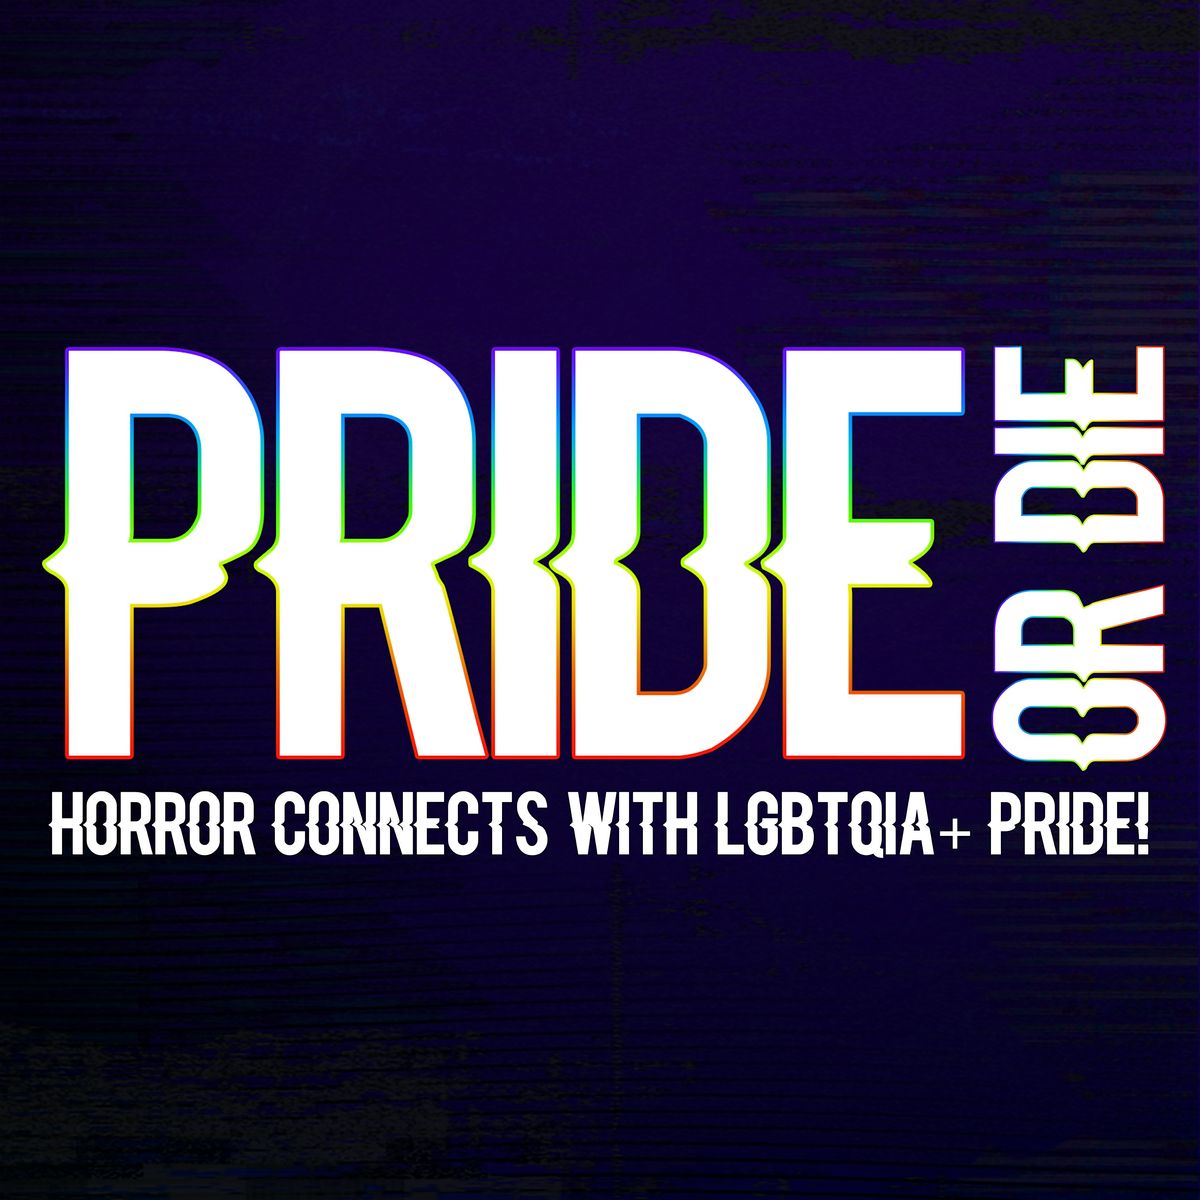 Horror in Color's fourth annual PRIDE OR DIE